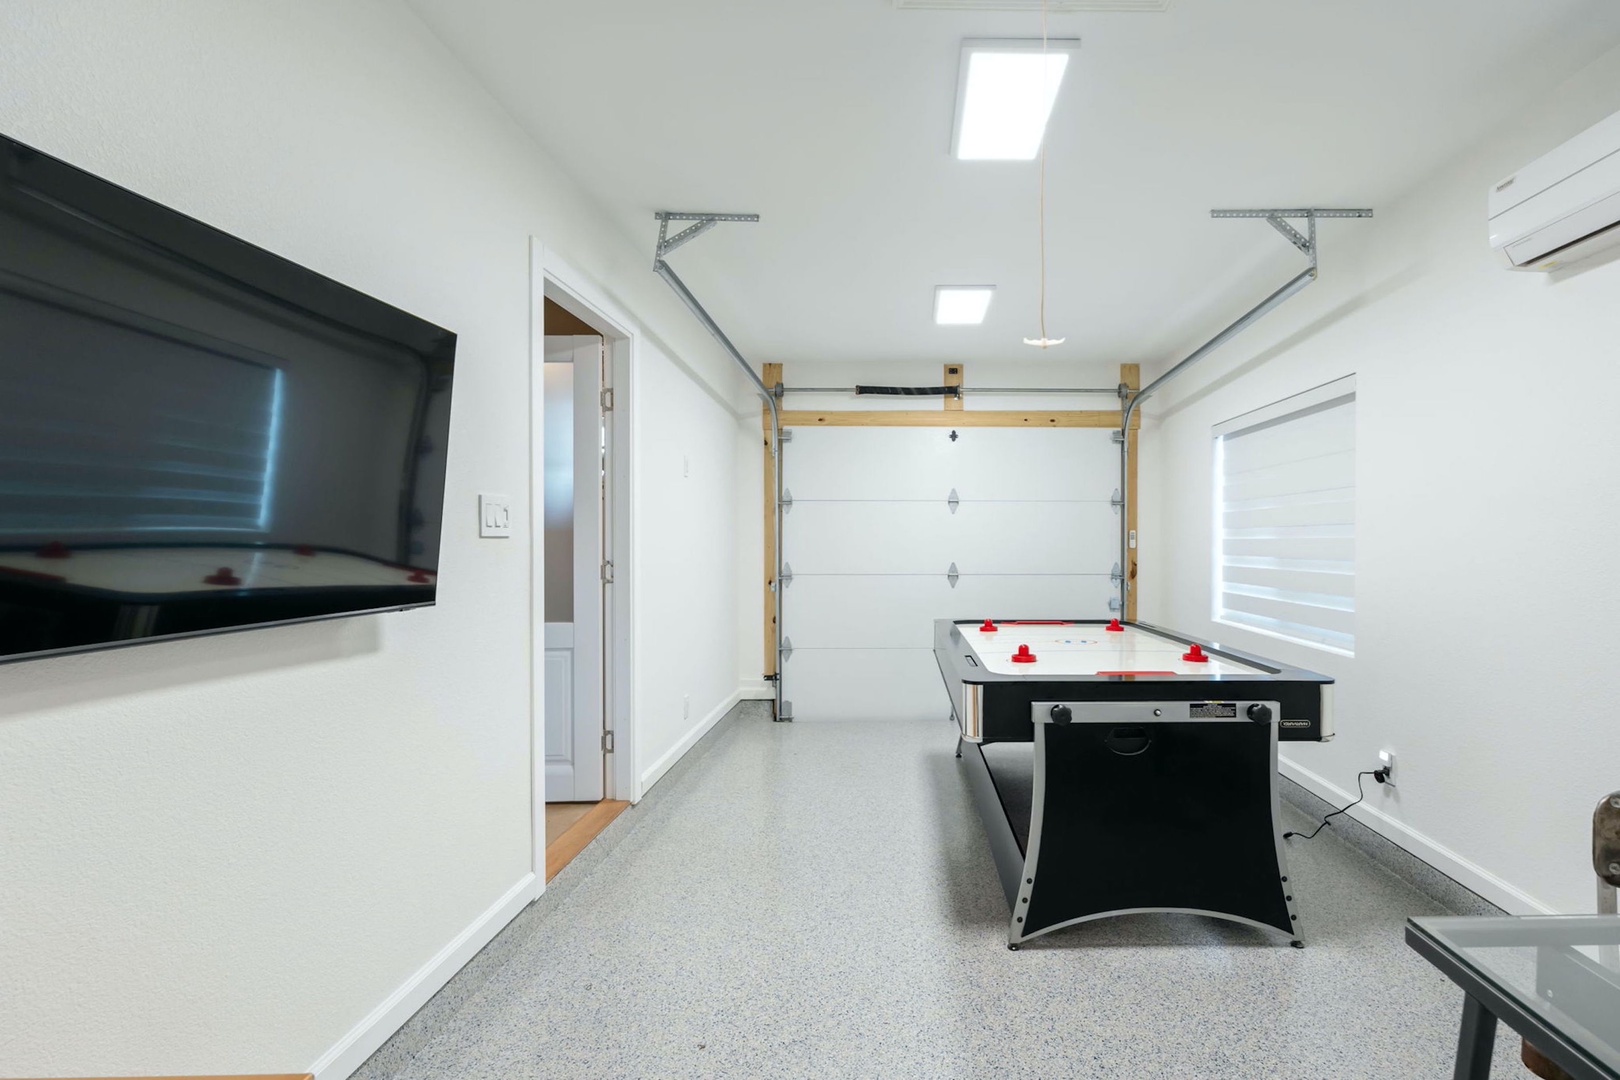 Get competitive with a round of air hockey in the garage game room